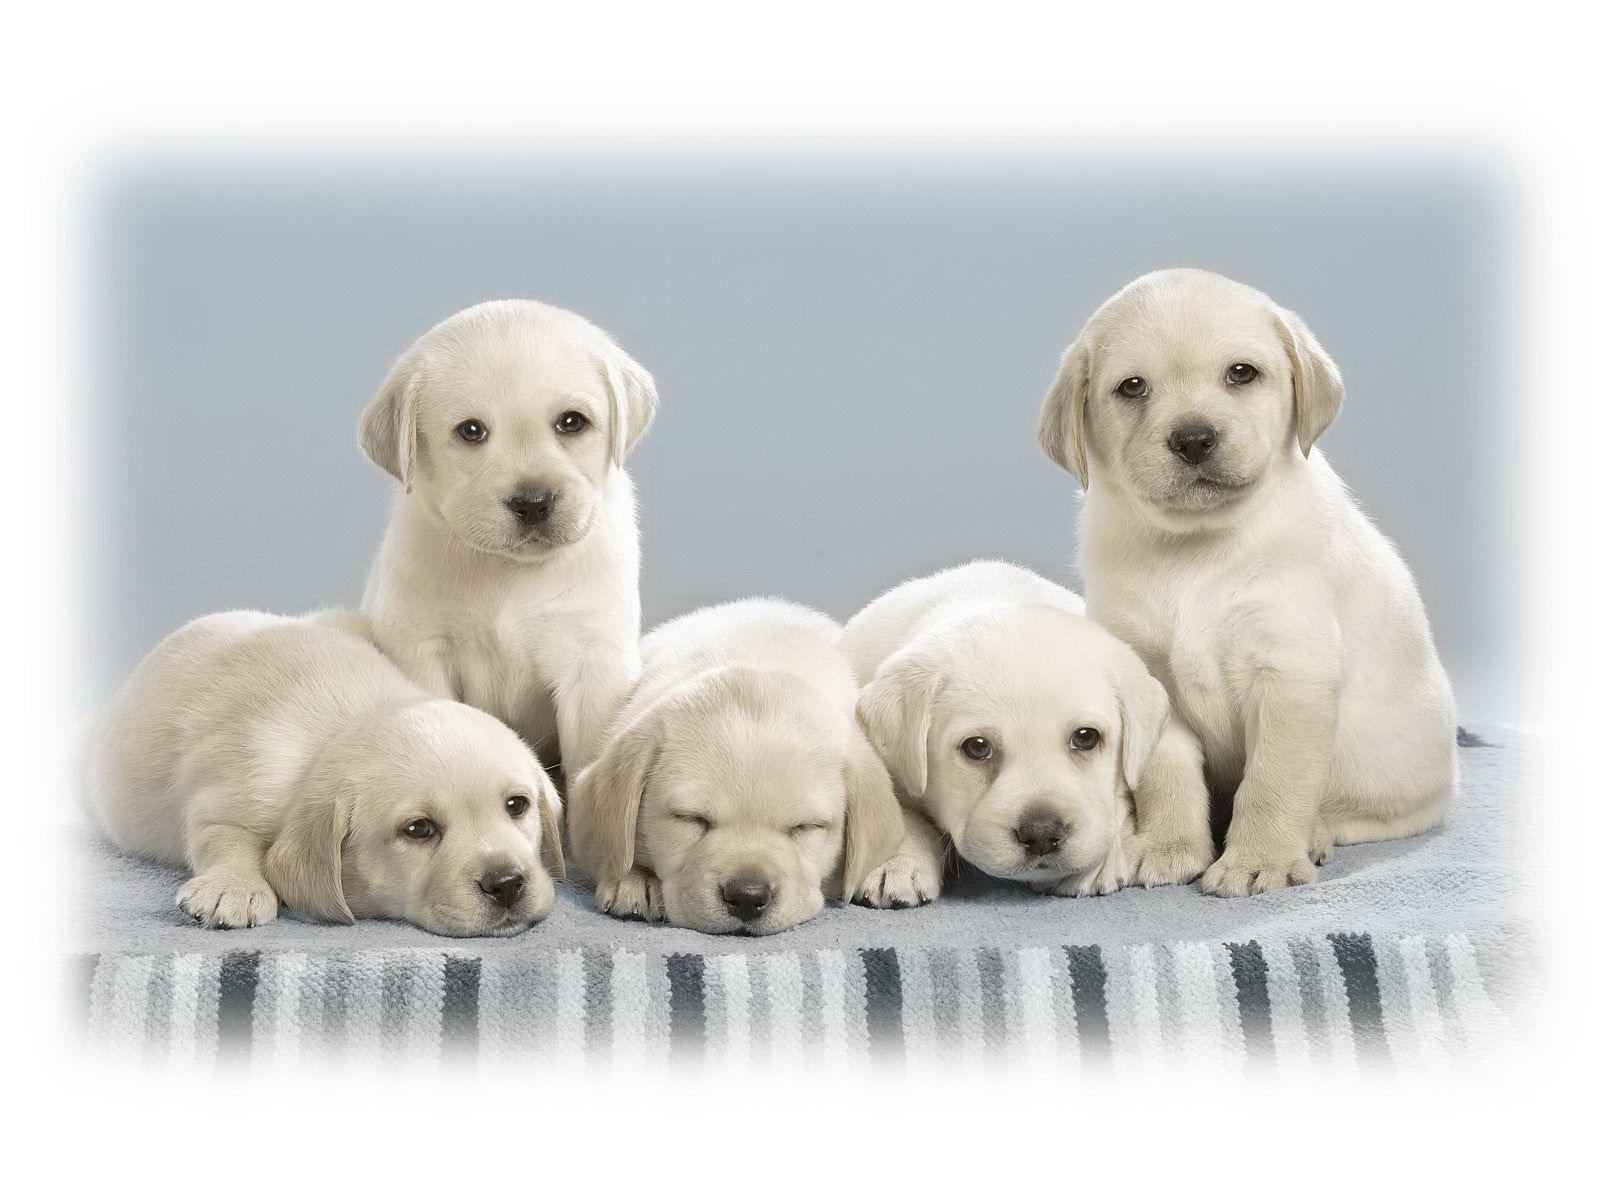 Wallpaper Background Dogs Home Puppy Dog